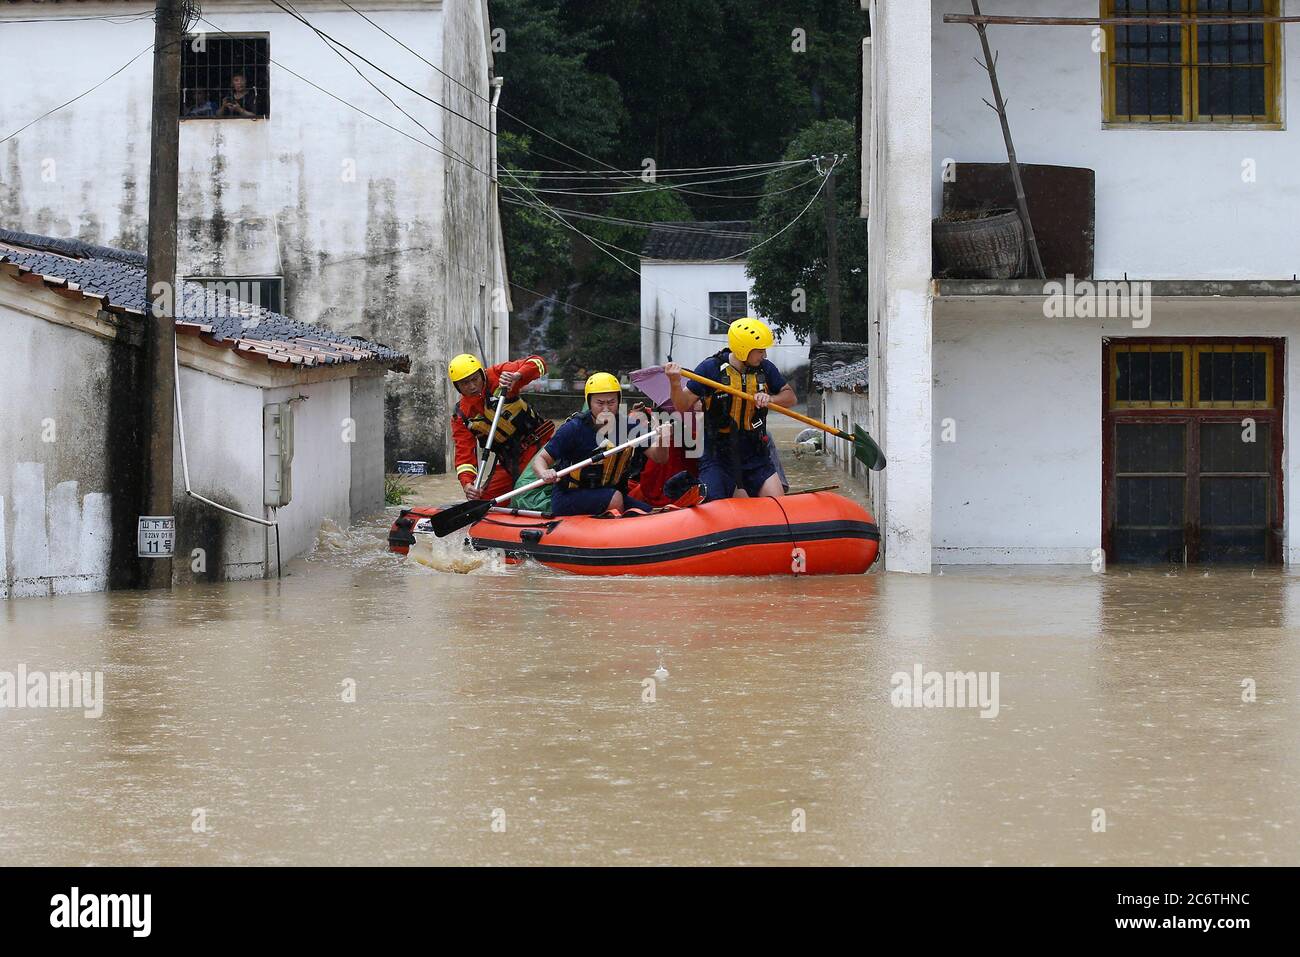 Huangshan, Huangshan, China. 12th July, 2020. CHINA-Huangshan District, Huangshan City, Anhui Province, has been hit by heavy rain for several days, leading to floods in some areas. The local authorities have urgently dispatched boats and kayaks to evacuate the trapped people. It is reported that the average rainfall in Huangshan District of Huangshan City, Anhui Province was 83mm from 22:00 on July 5 to 10:00 on July 6. The rainfall in many towns exceeded 100mm, with the maximum rainfall reaching 152.2mm. Credit: SIPA Asia/ZUMA Wire/Alamy Live News Stock Photo